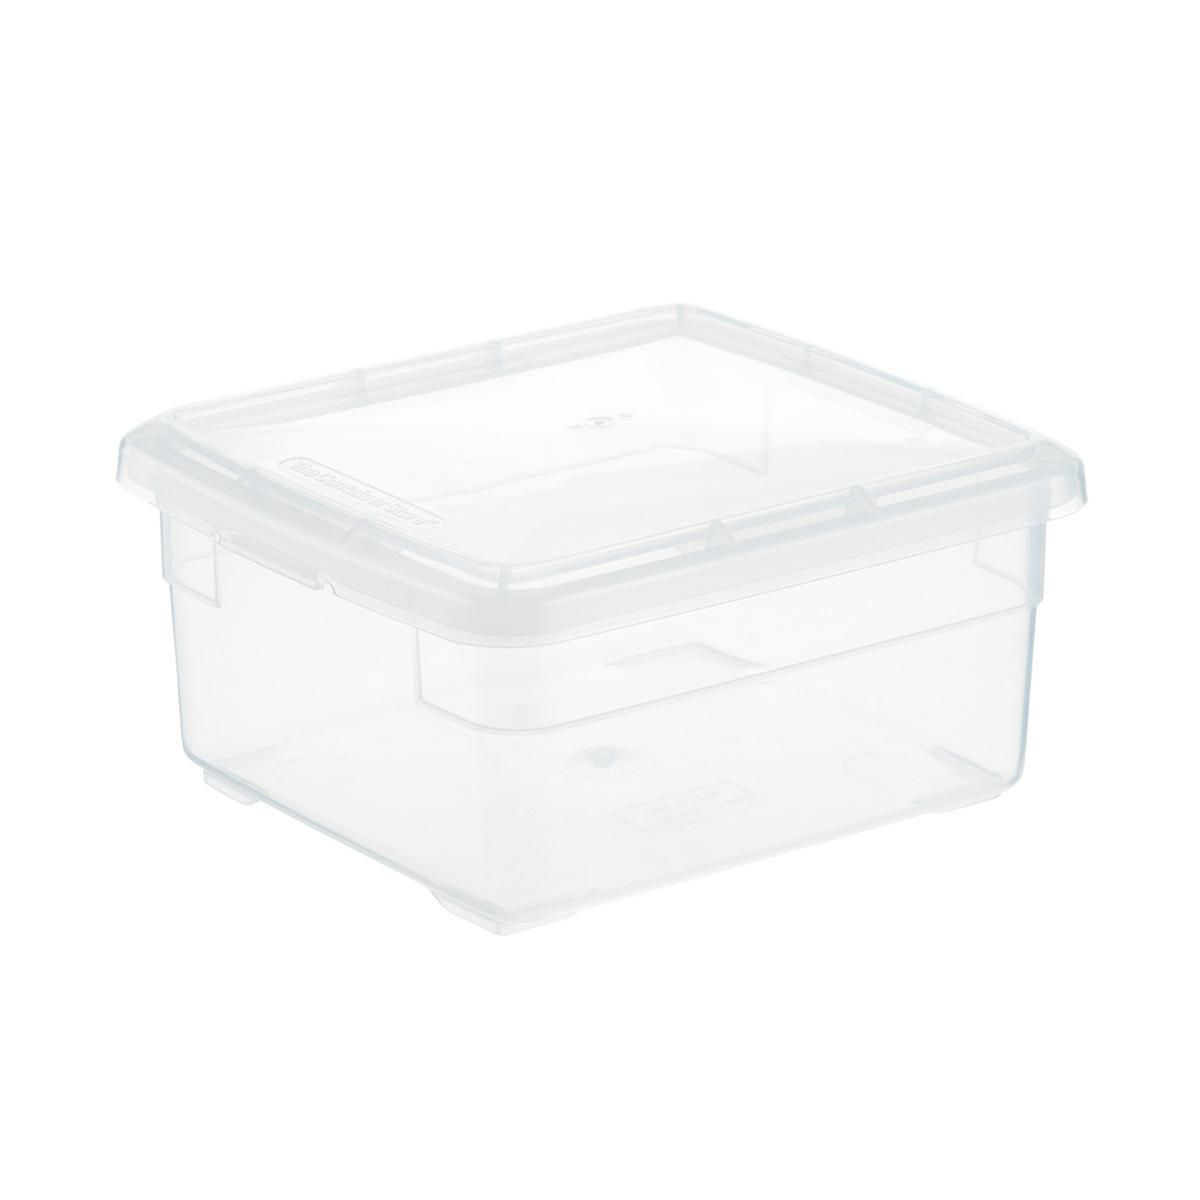 Our Accessory Box | The Container Store